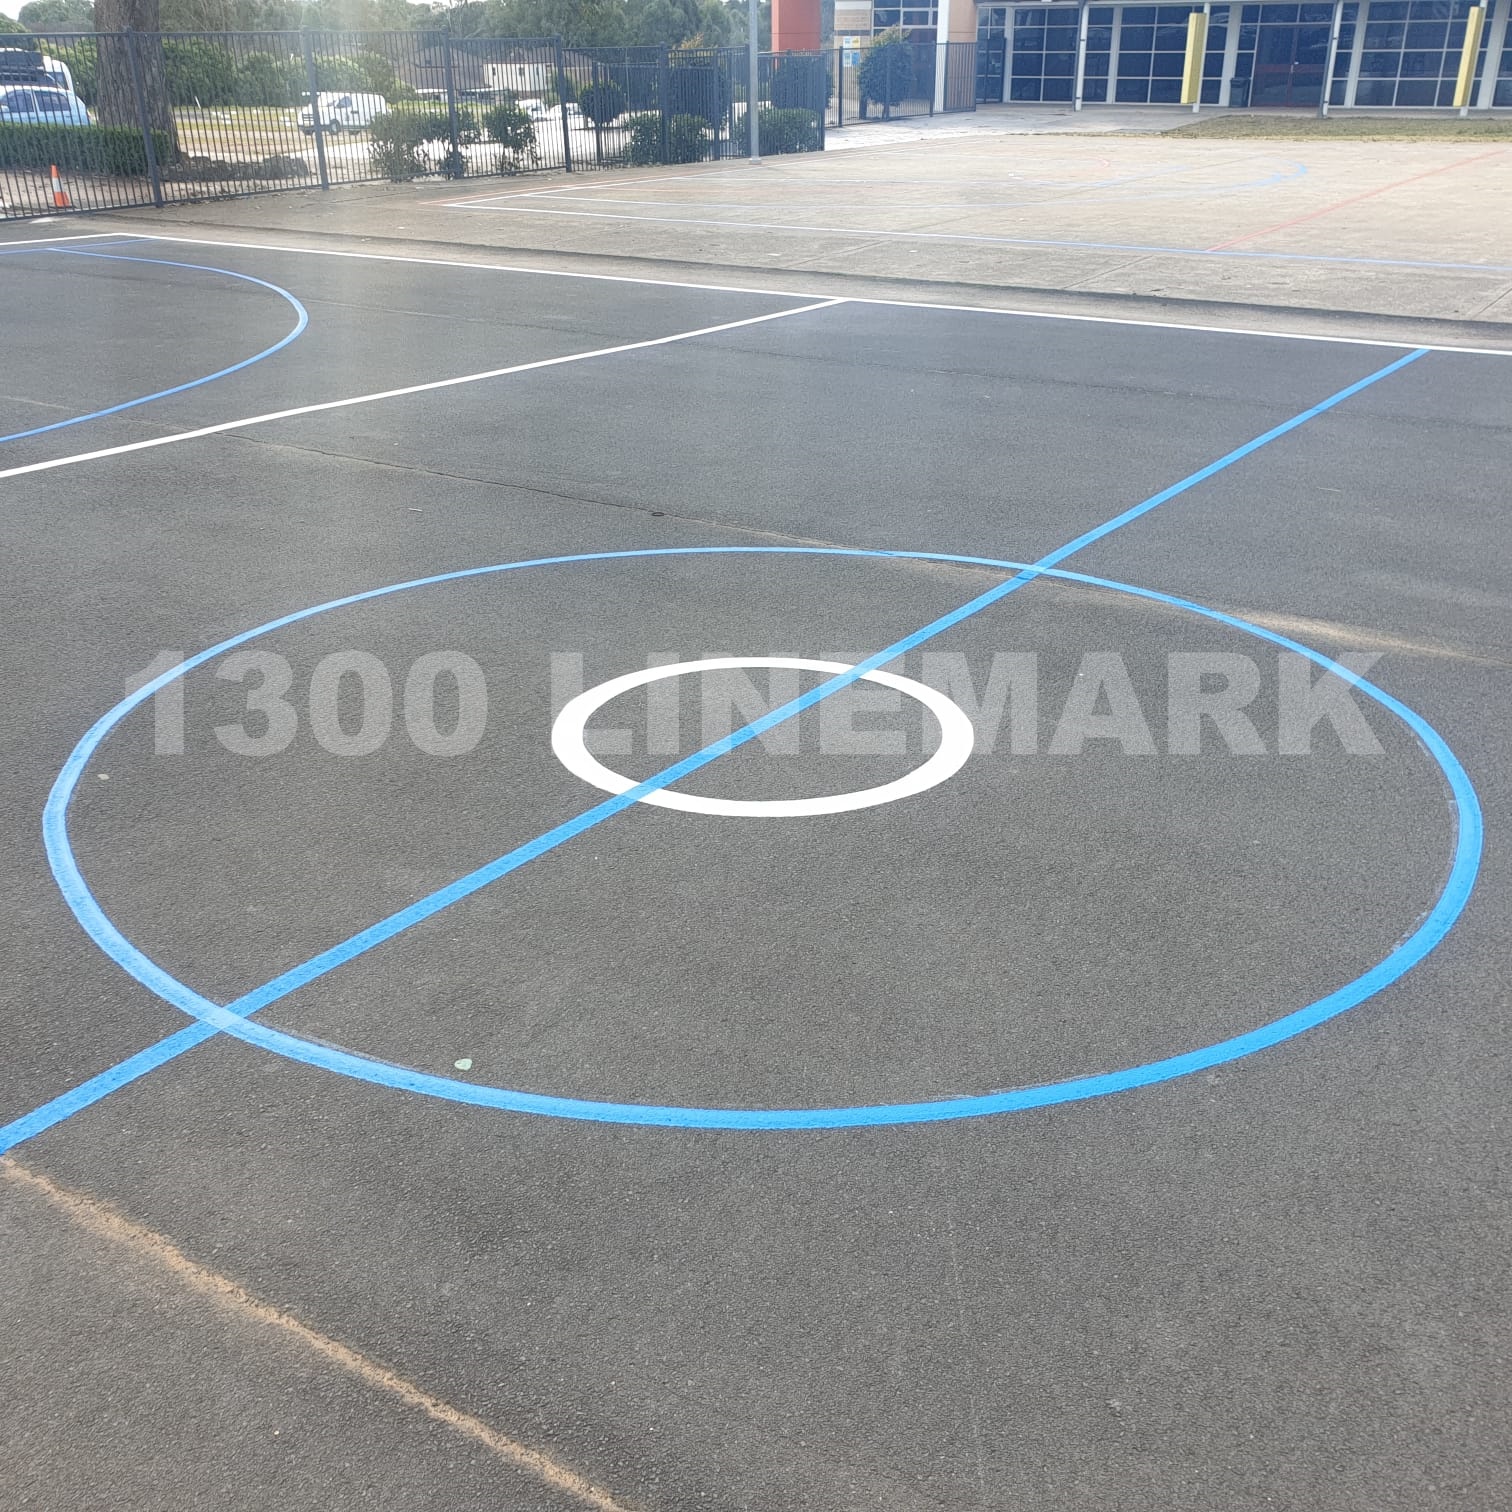 Special events line marking basketball